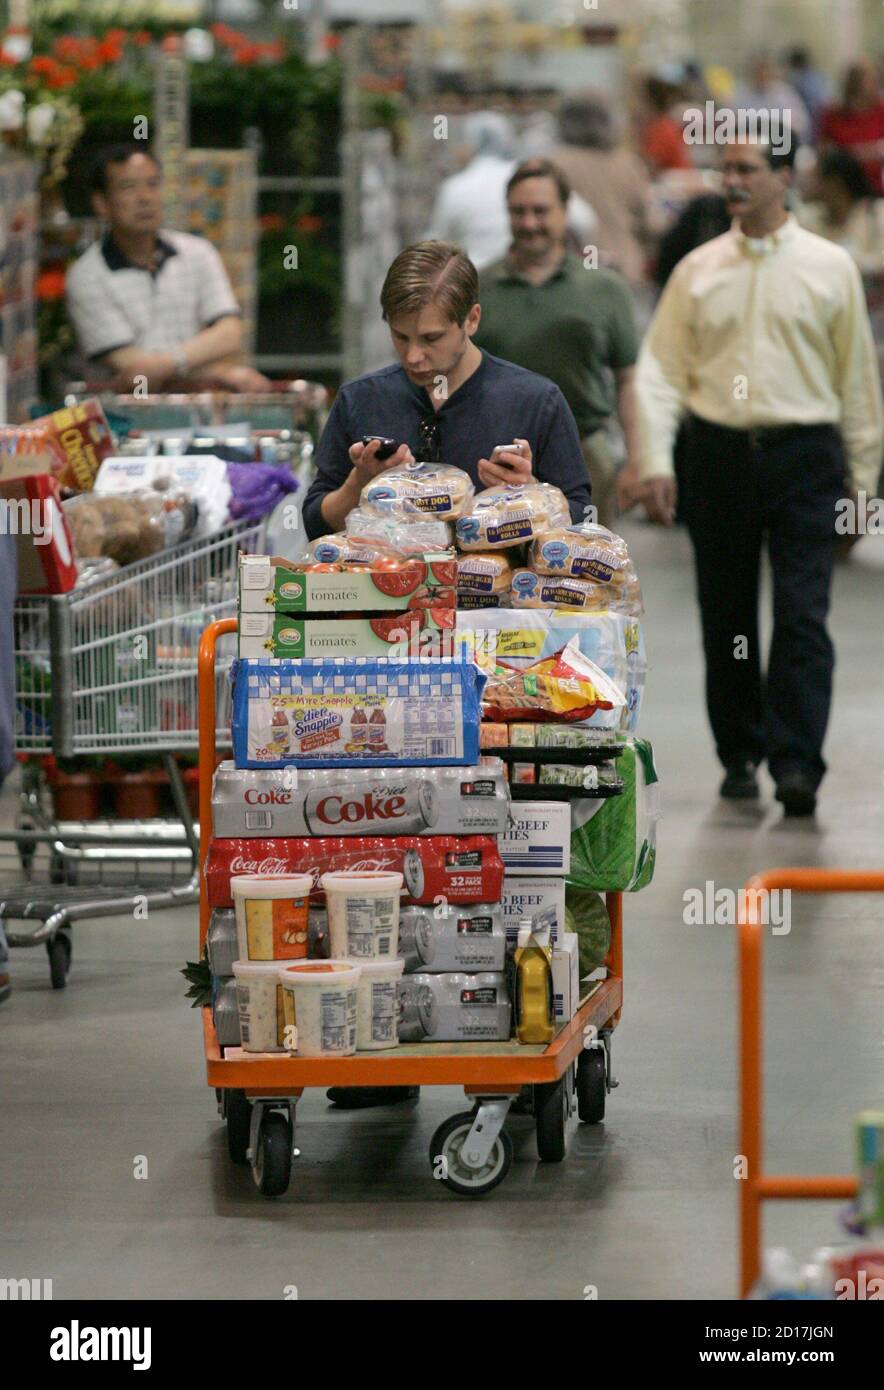 A shopper checks his cell phone while shopping at the Costco Warehouse in  Arlington, Virginia, May 29, 2008. Costco Wholesale Corp., the biggest U.S.  warehouse club operator, reported a 32 percent jump